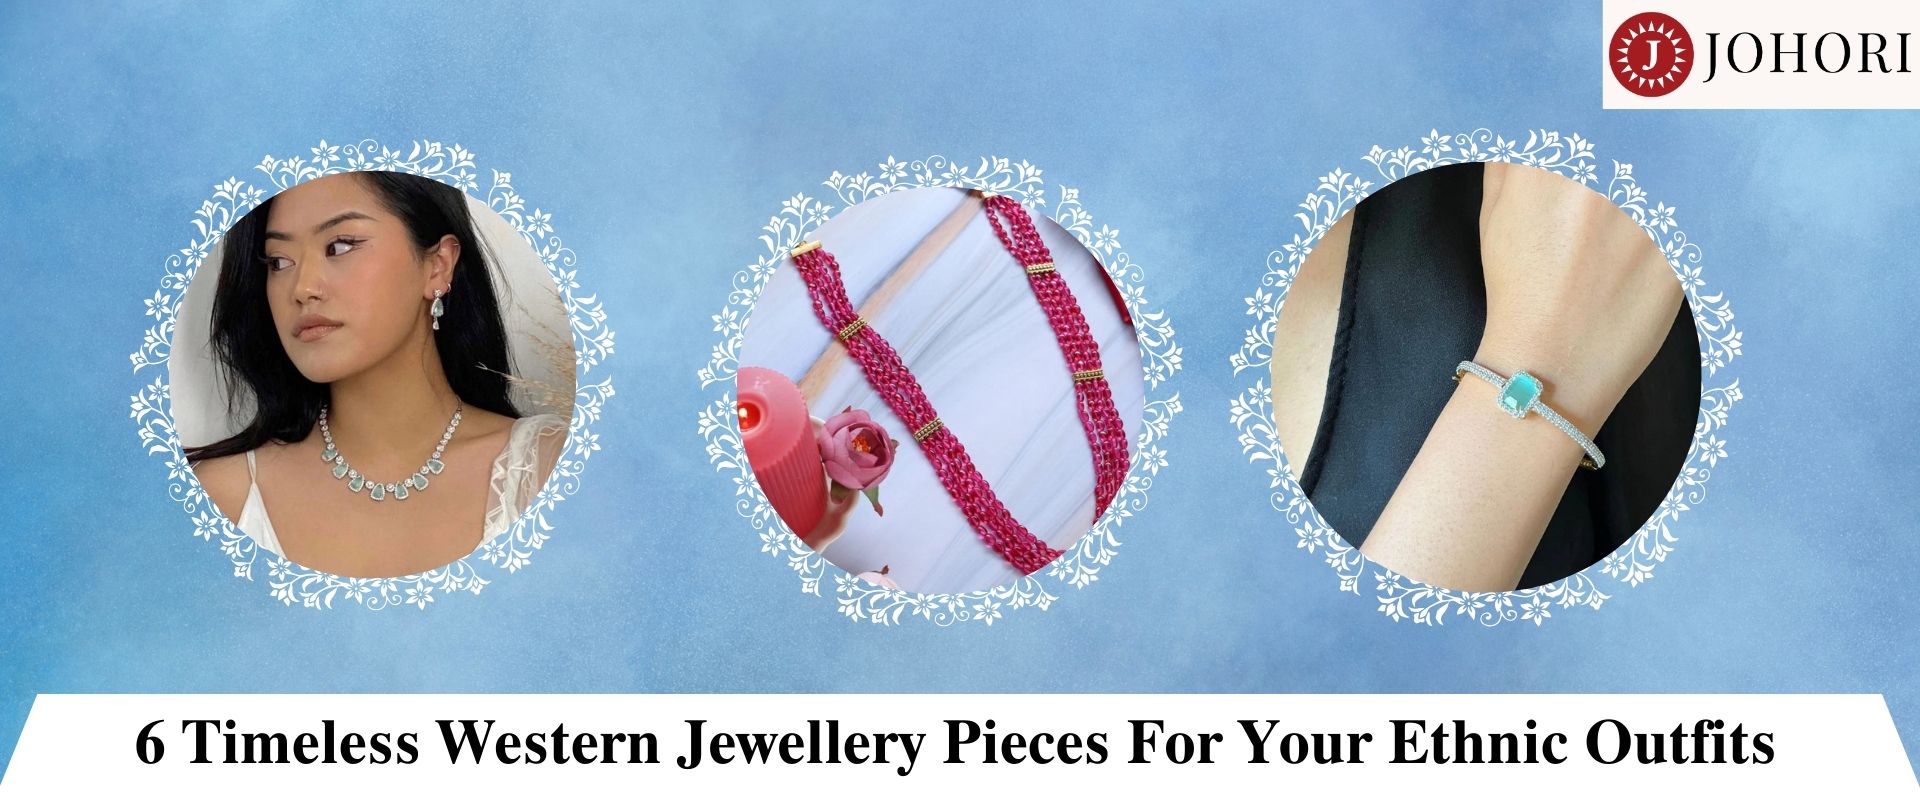 6 Timeless Western Jewellery Pieces For Your Ethnic Outfits